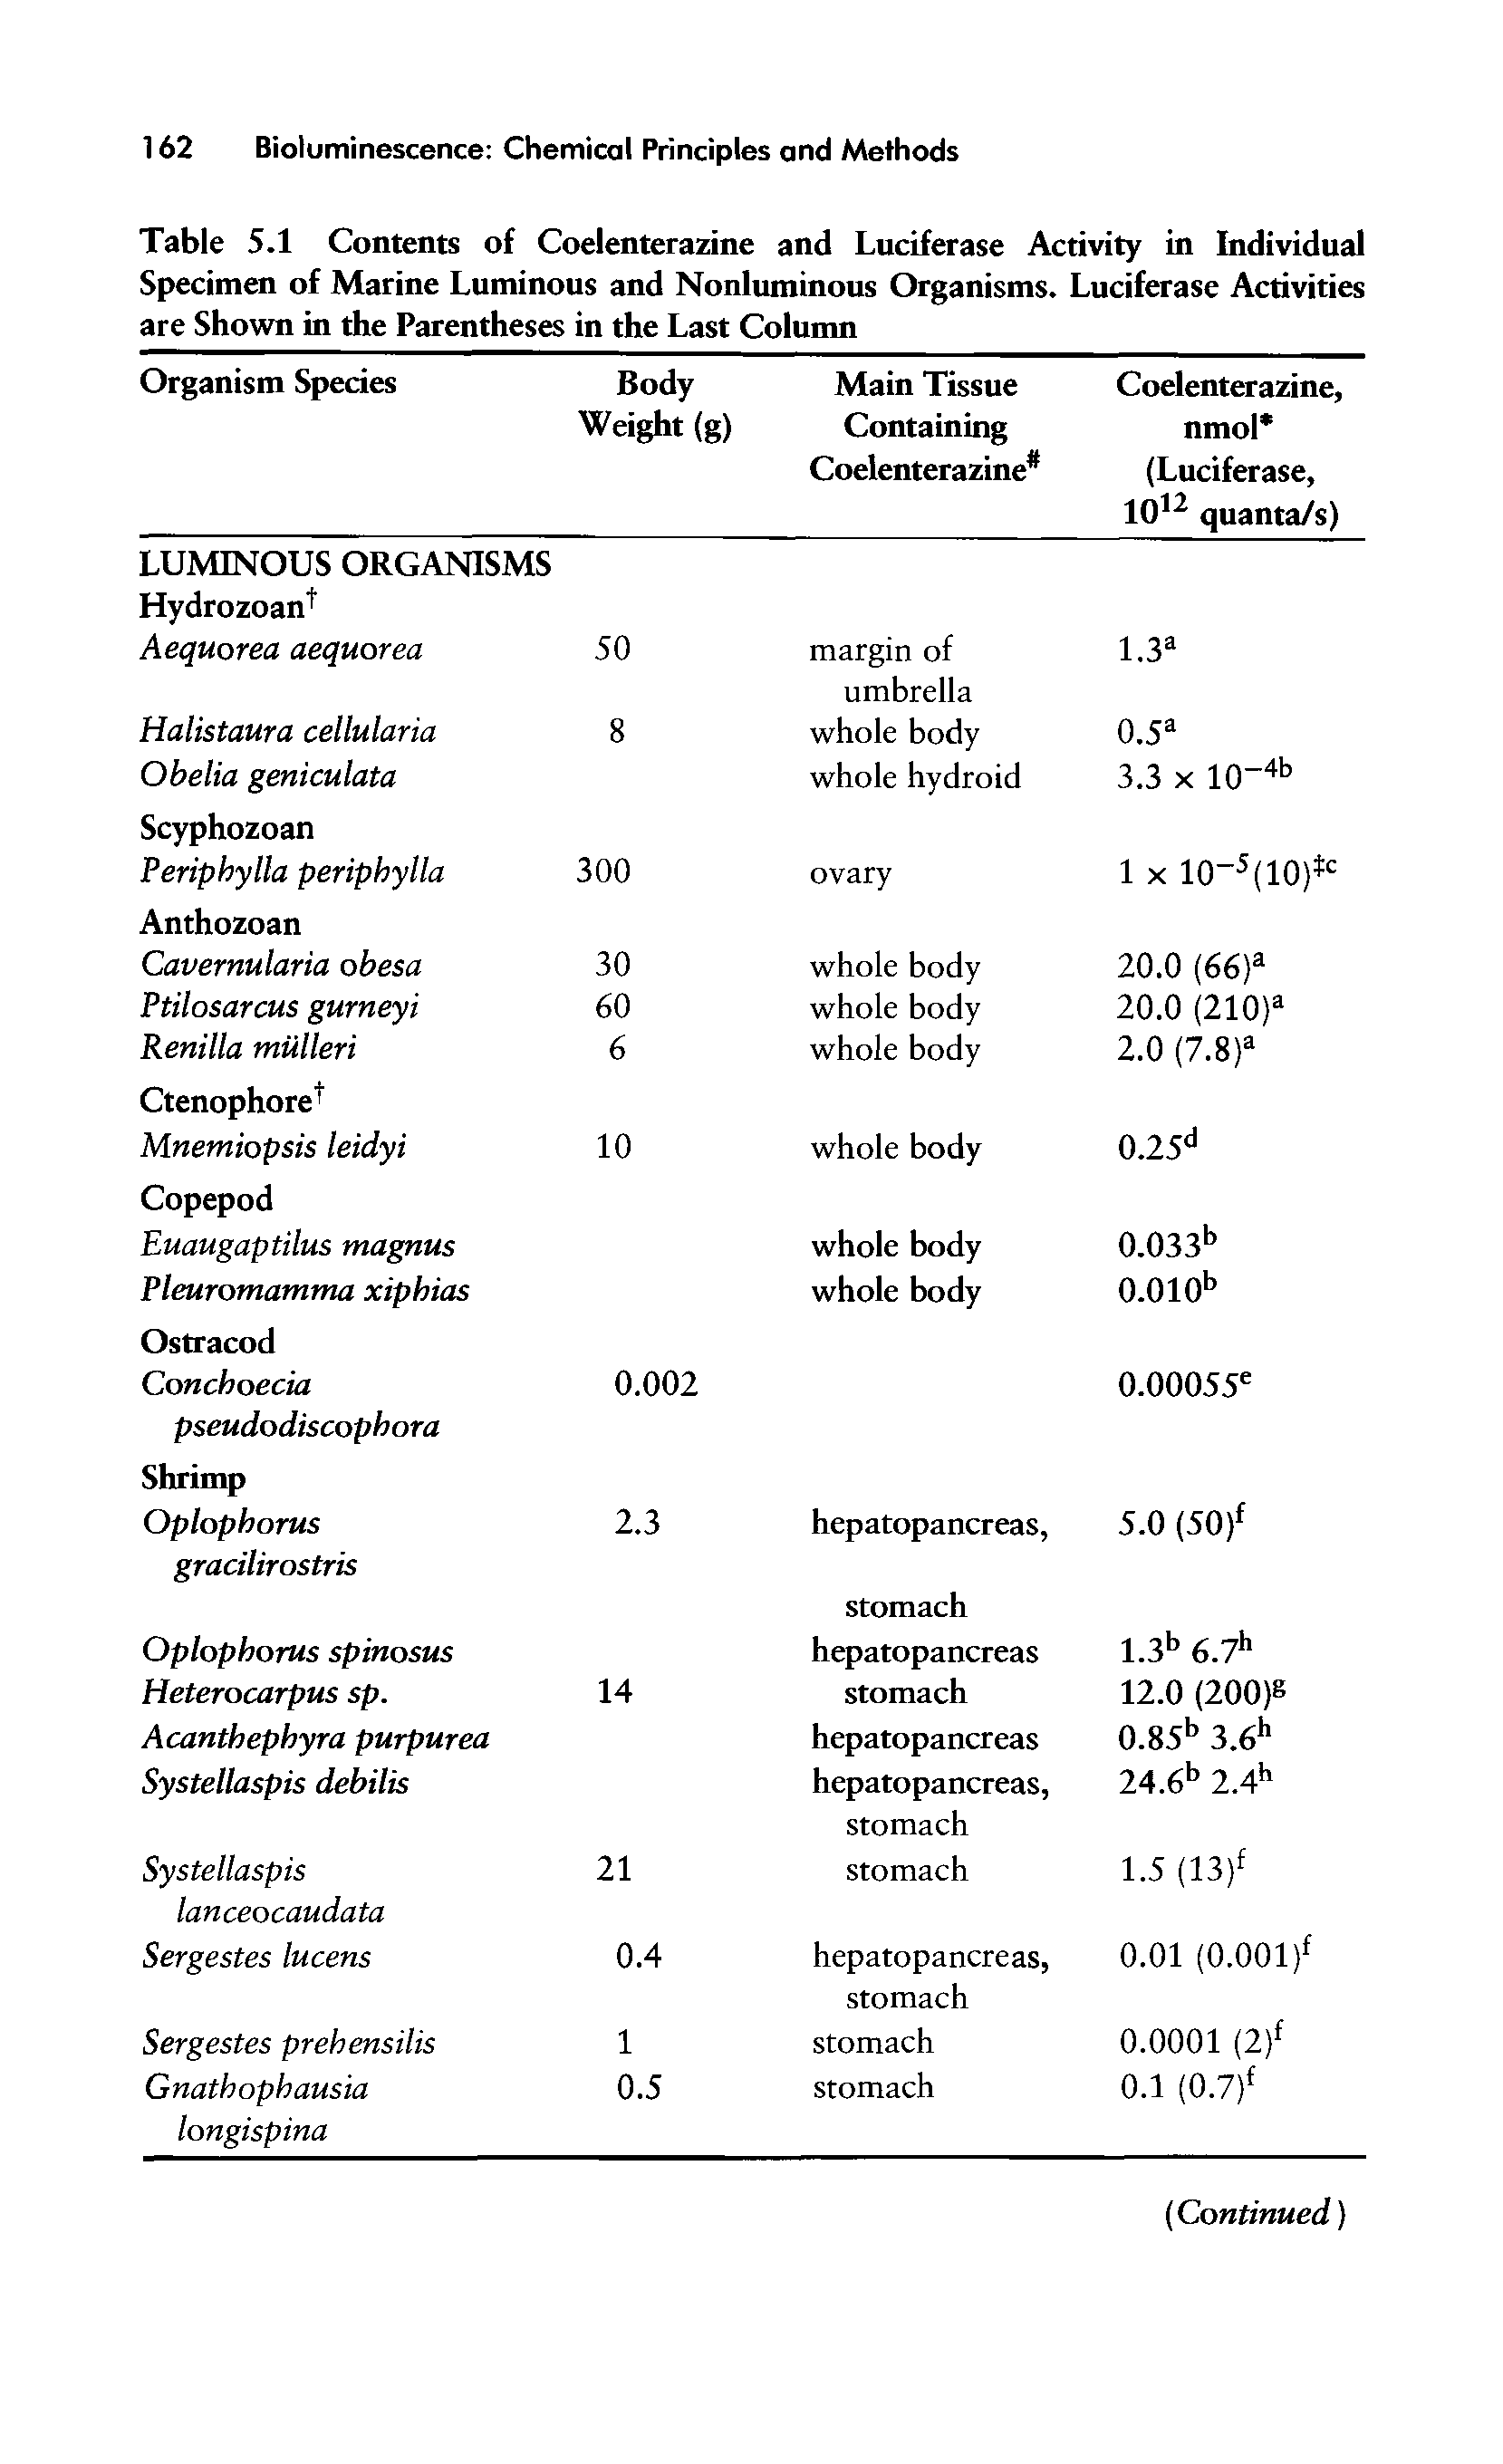 Table 5.1 Contents of Coelenterazine and Luciferase Activity in Individual Specimen of Marine Luminous and Nonluminous Organisms. Luciferase Activities are Shown in the Parentheses in the Last Column...